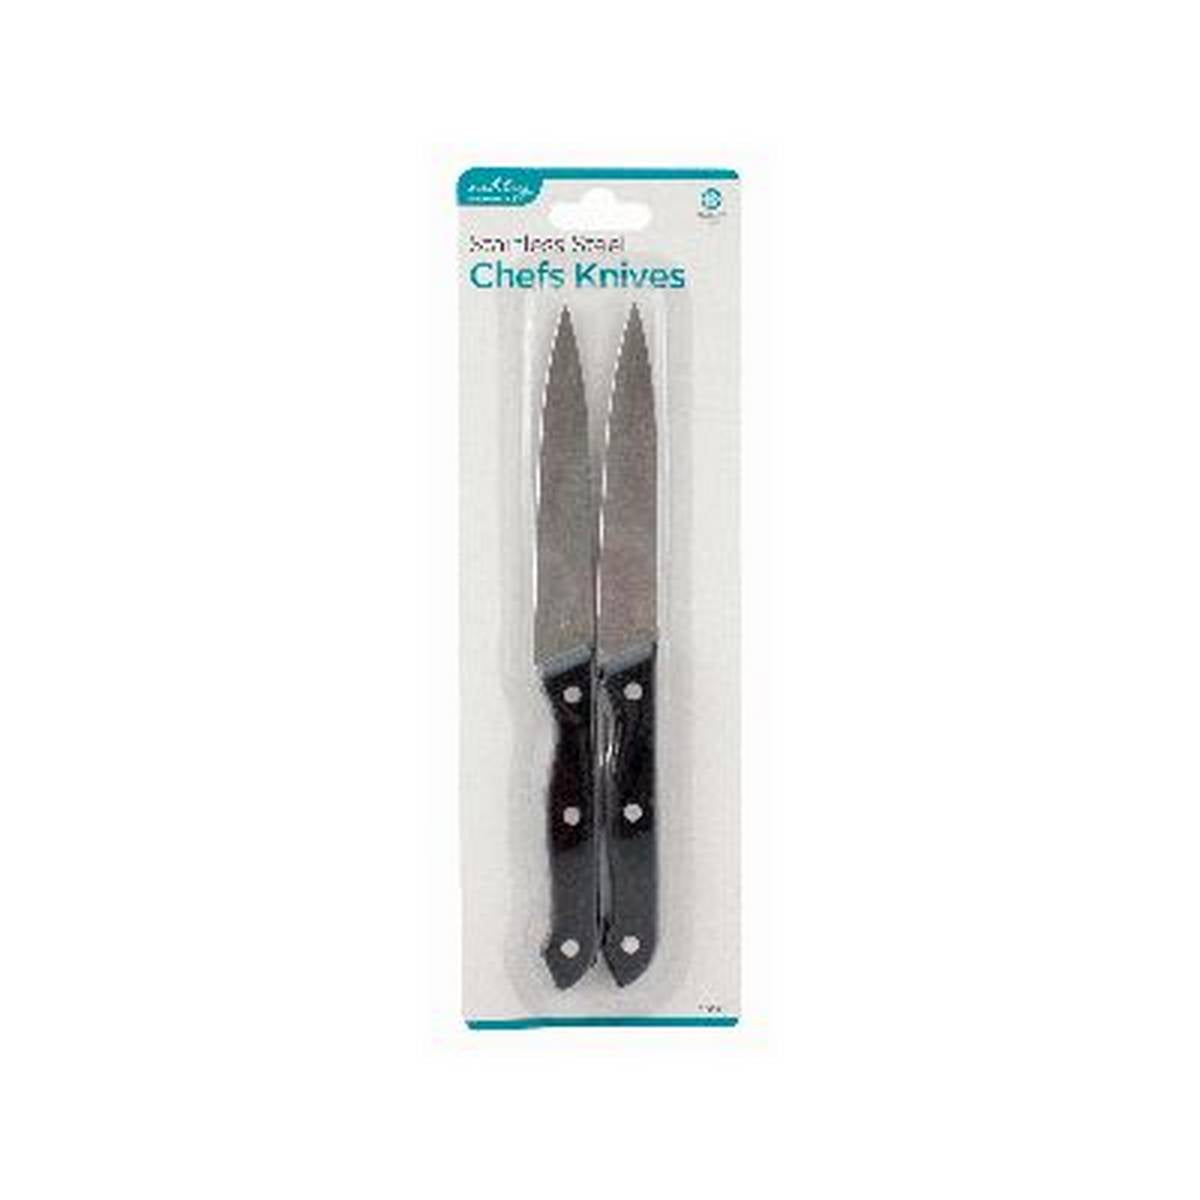 ASHLEY STAINLESS STEEL CHEFS KNIVES  SET 2PK BB-KN500